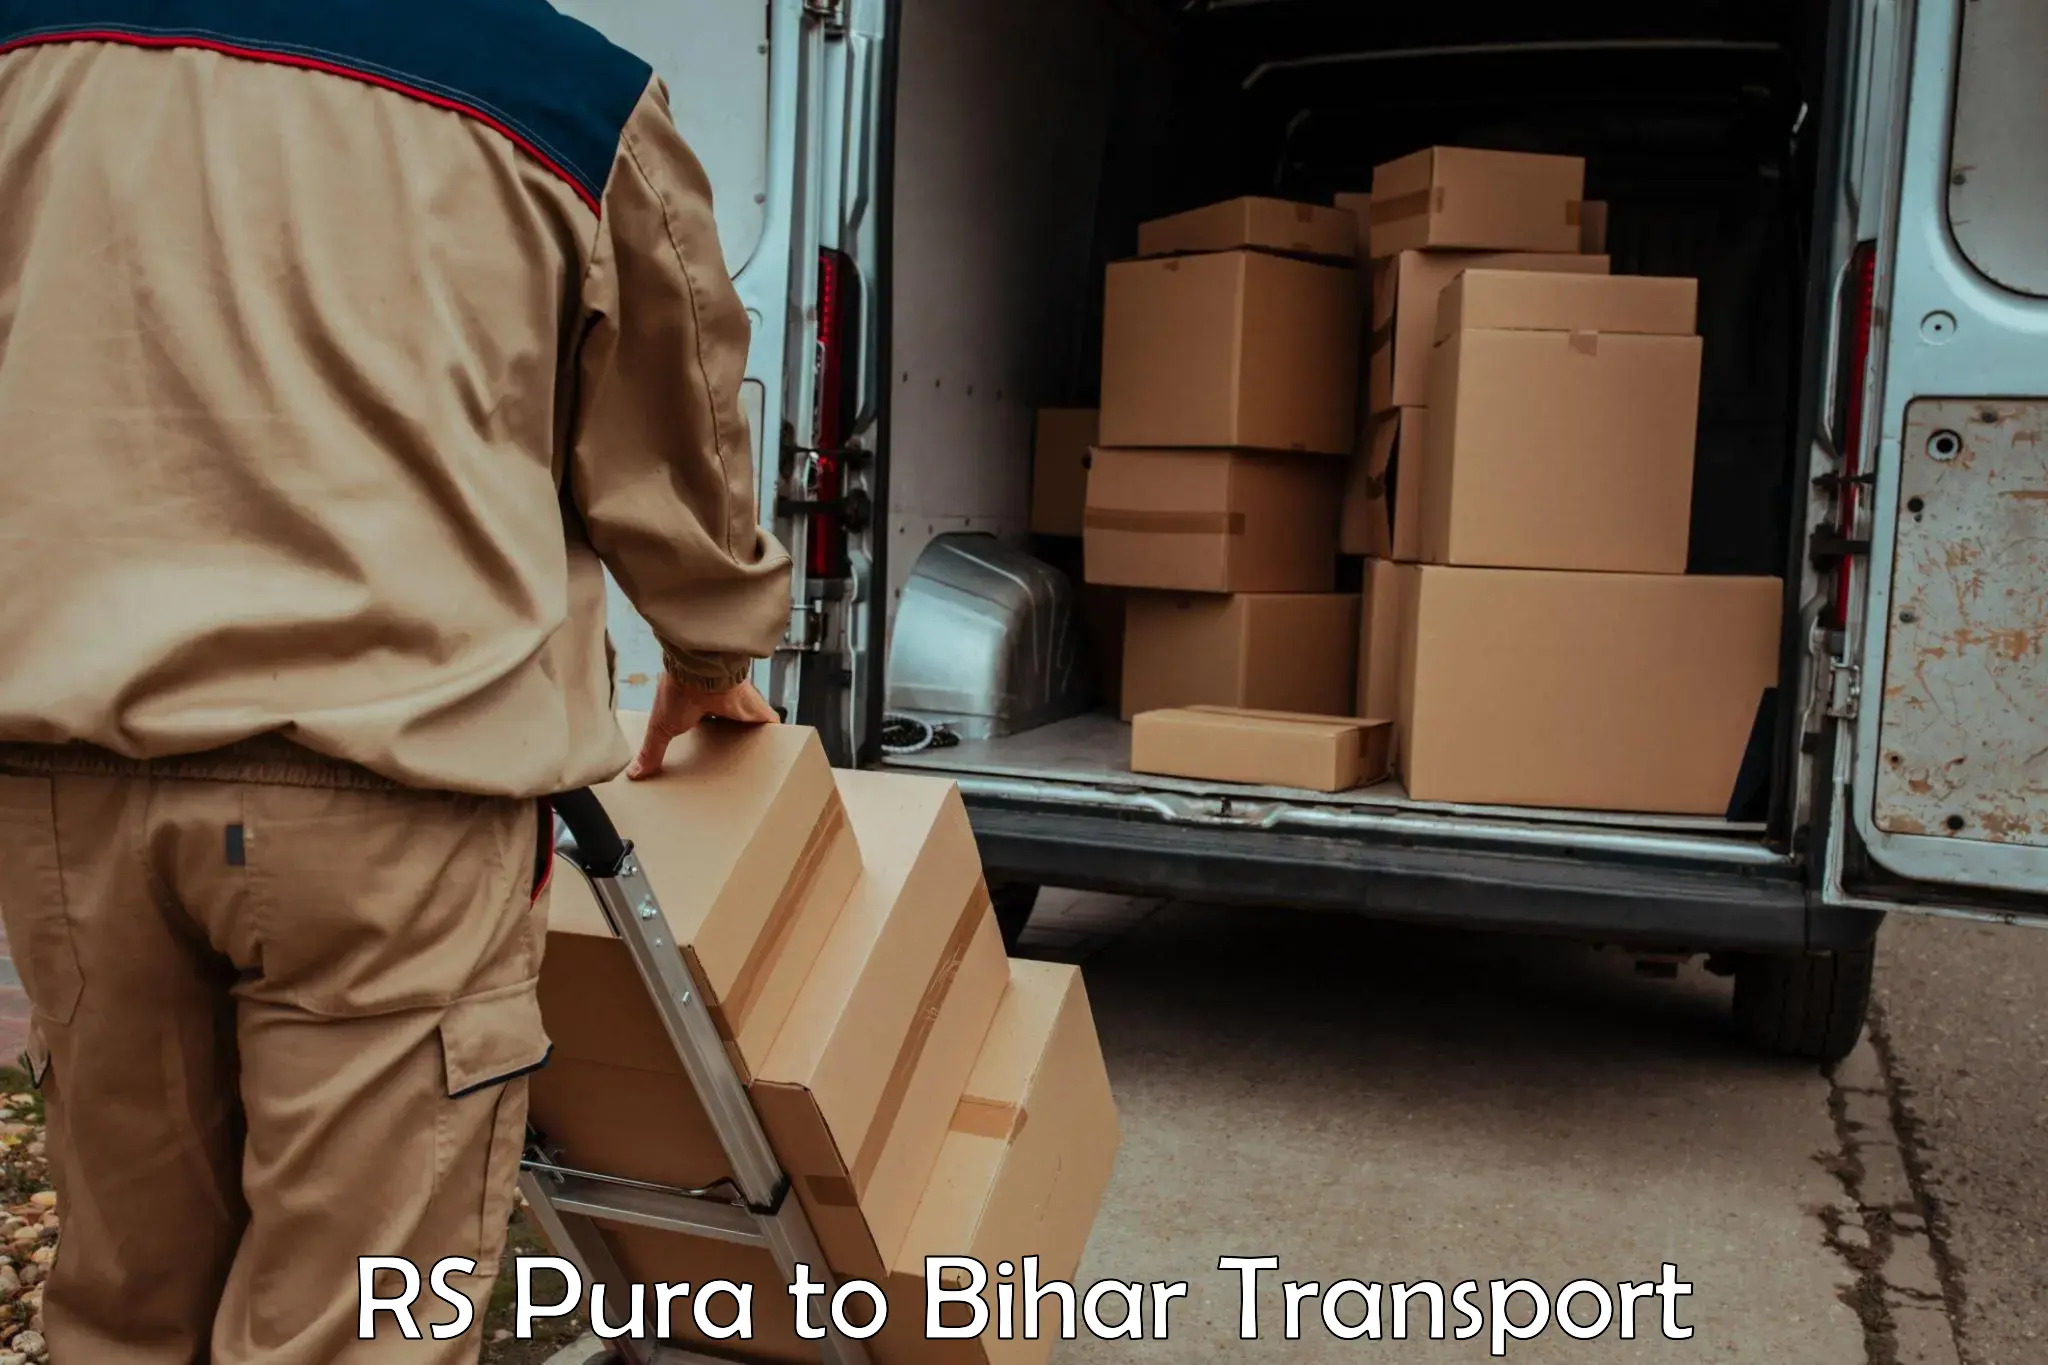 Parcel transport services in RS Pura to Dinara